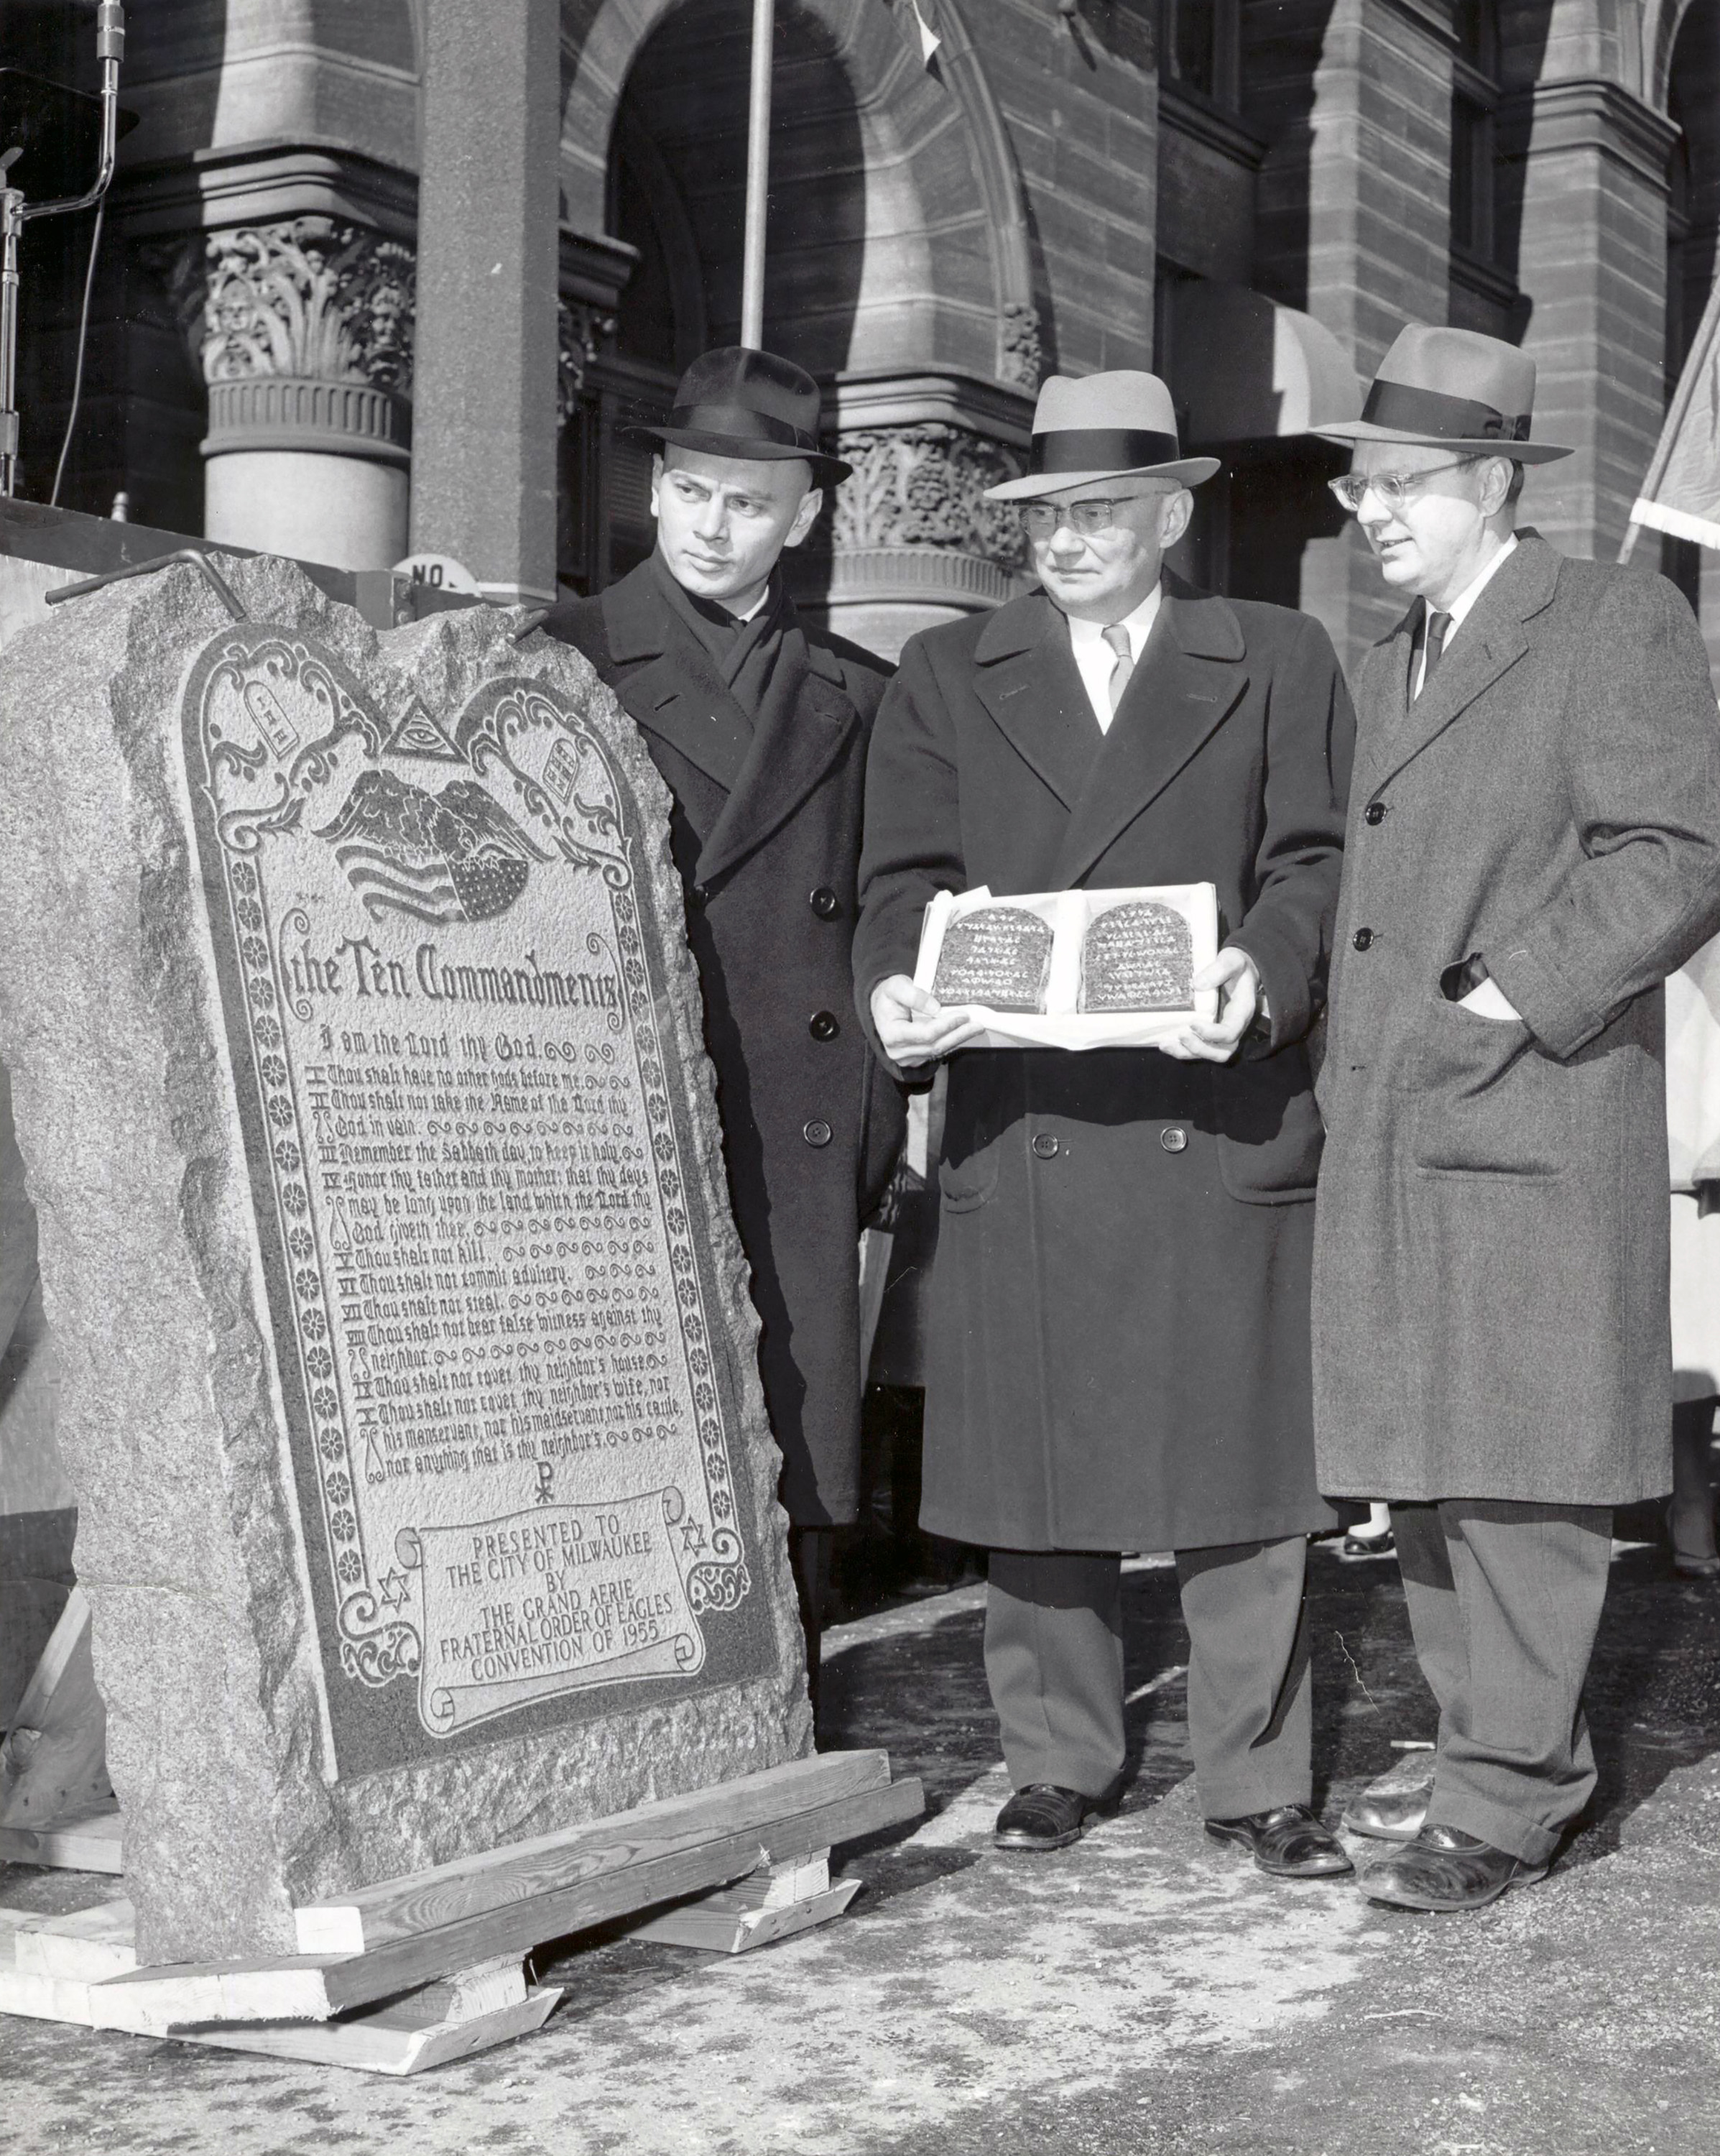 Actor Yul Brenner, star of The Ten Commandments film, with F.O.E.representatives at dedication of F.O.E. Ten Commandents monument in Milwaukee, WI, 1955.